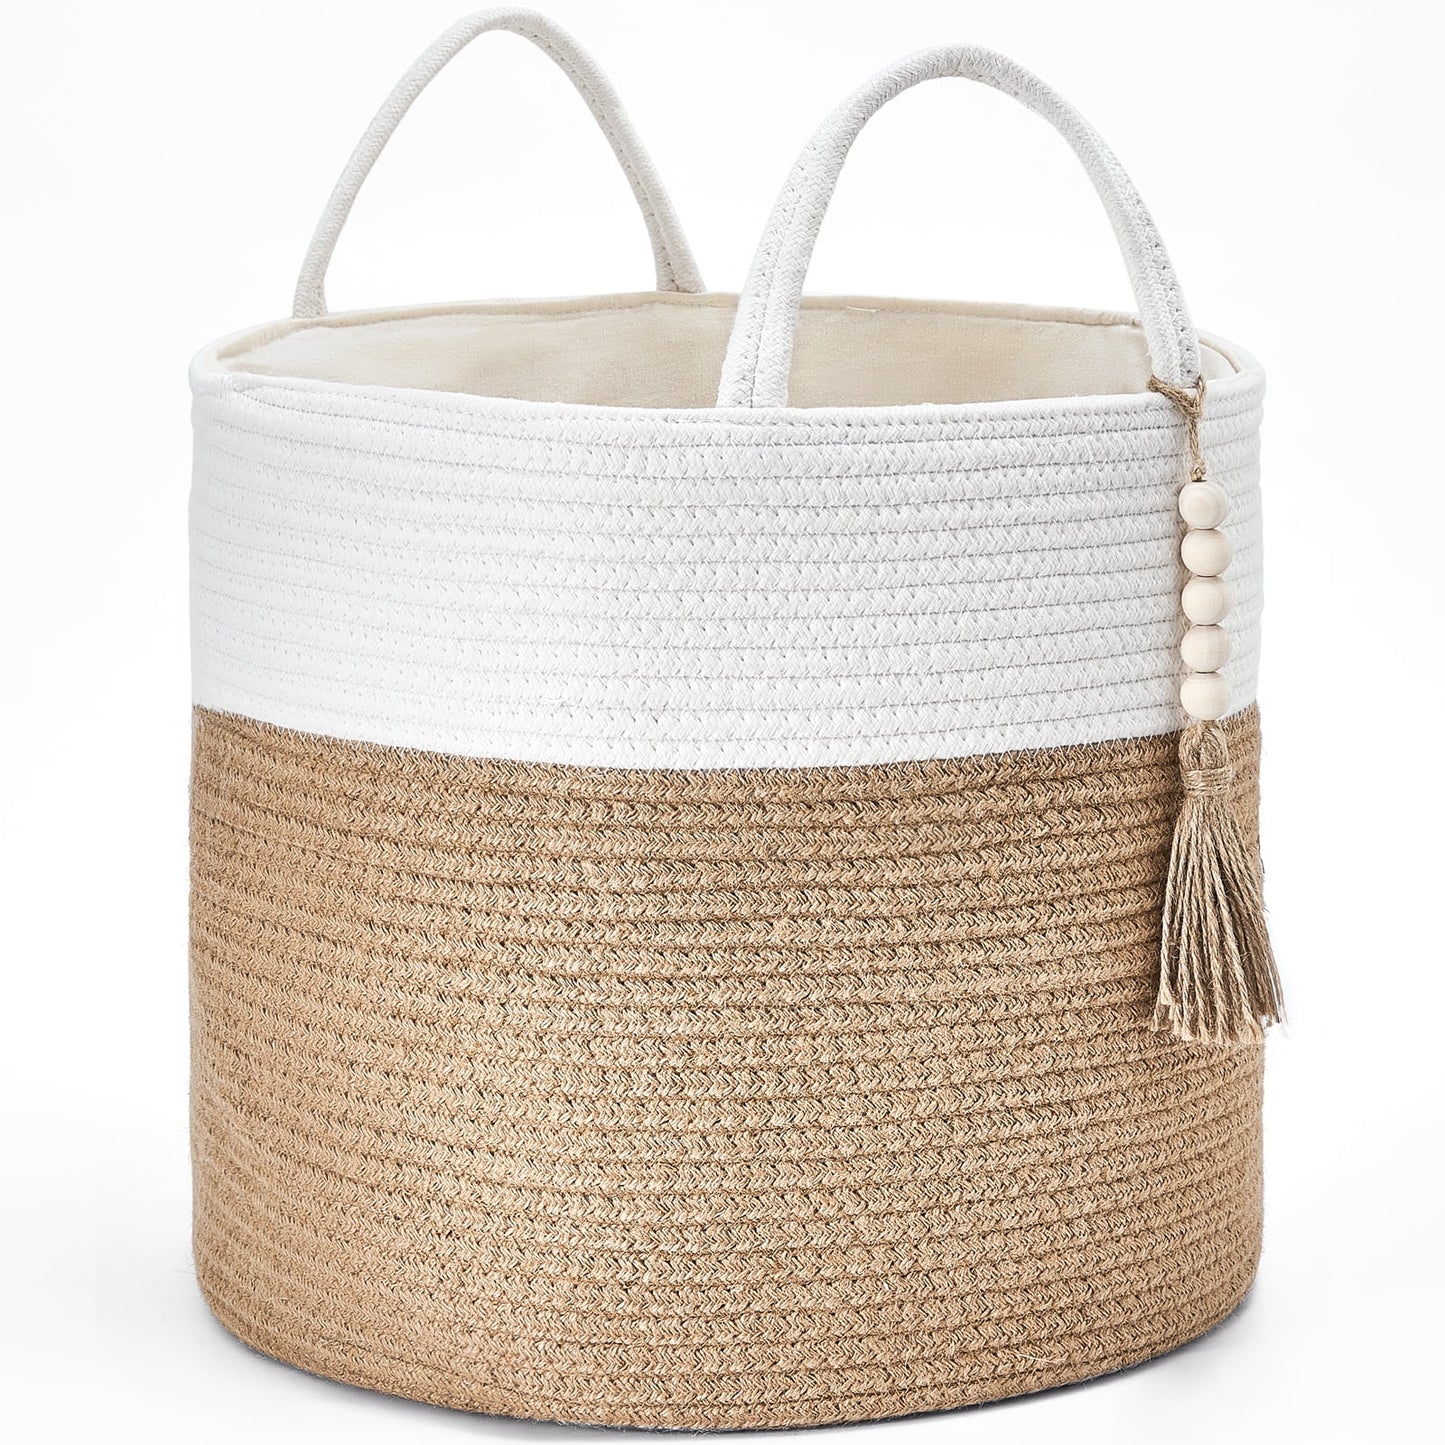 Mkono Woven Storage Basket with Decorative Bead Organizer Bin with Handles for Blankets Toys Clothes, 16"x 13.8"